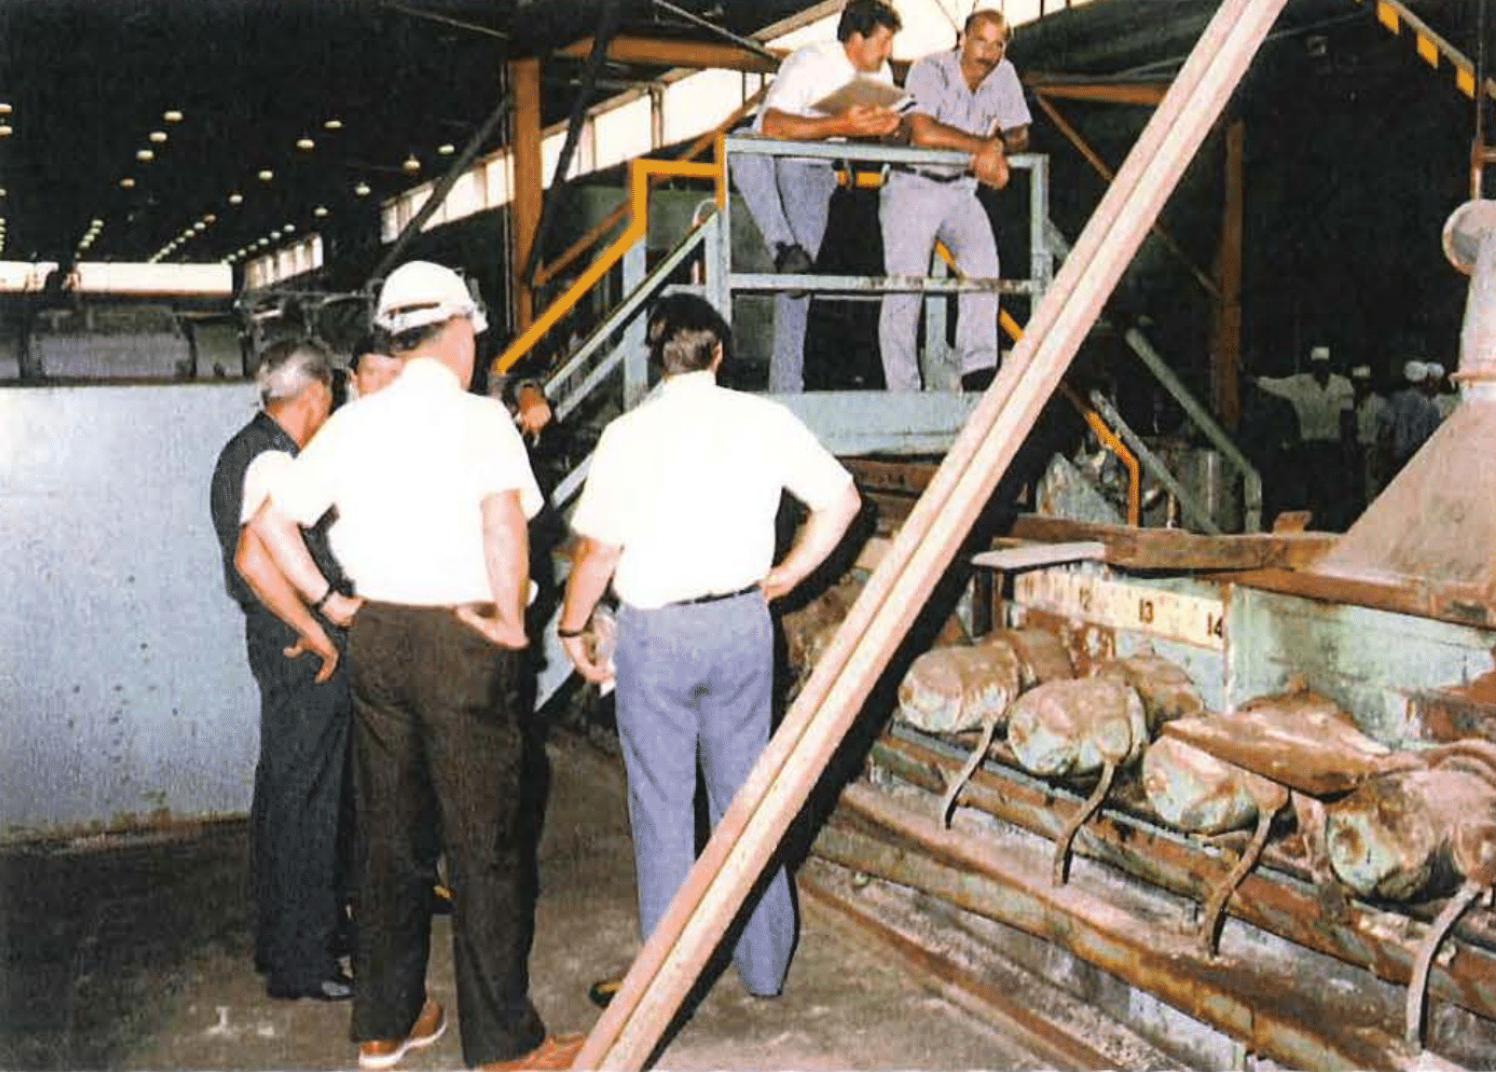 Workers stand near the salt vat inside of Plant 6 at the Fernald Feed Material Production Center after it was drained following the disappearance of employee David Bocks in June 1984.